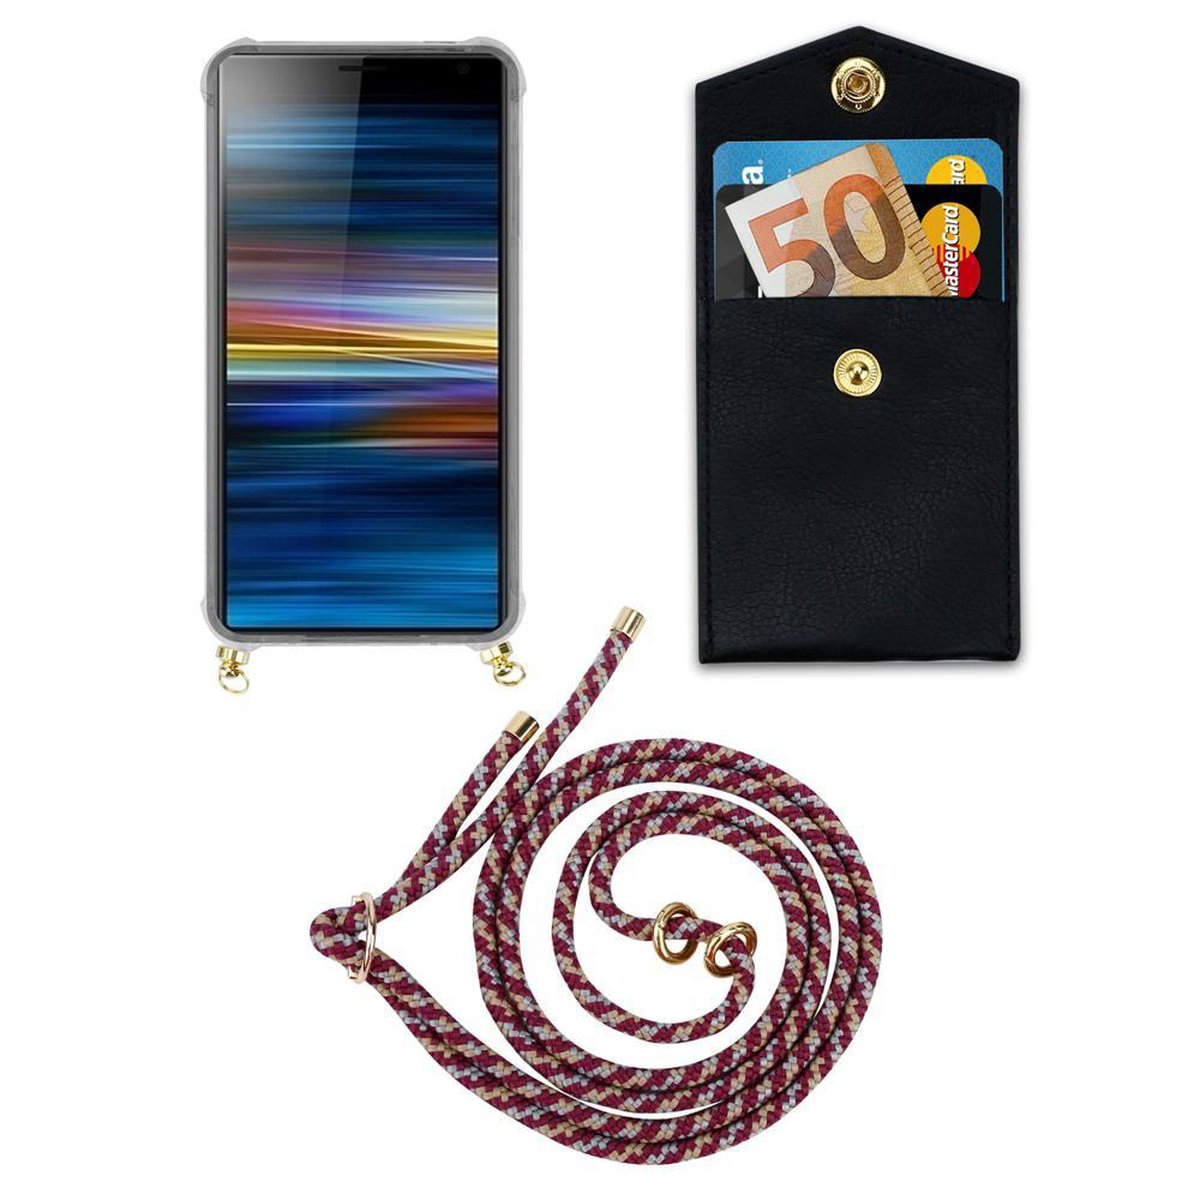 Kette Gold Kordel PLUS, Handy GELB CADORABO Band ROT mit Ringen, WEIß Hülle, und abnehmbarer Backcover, 10 Sony, Xperia